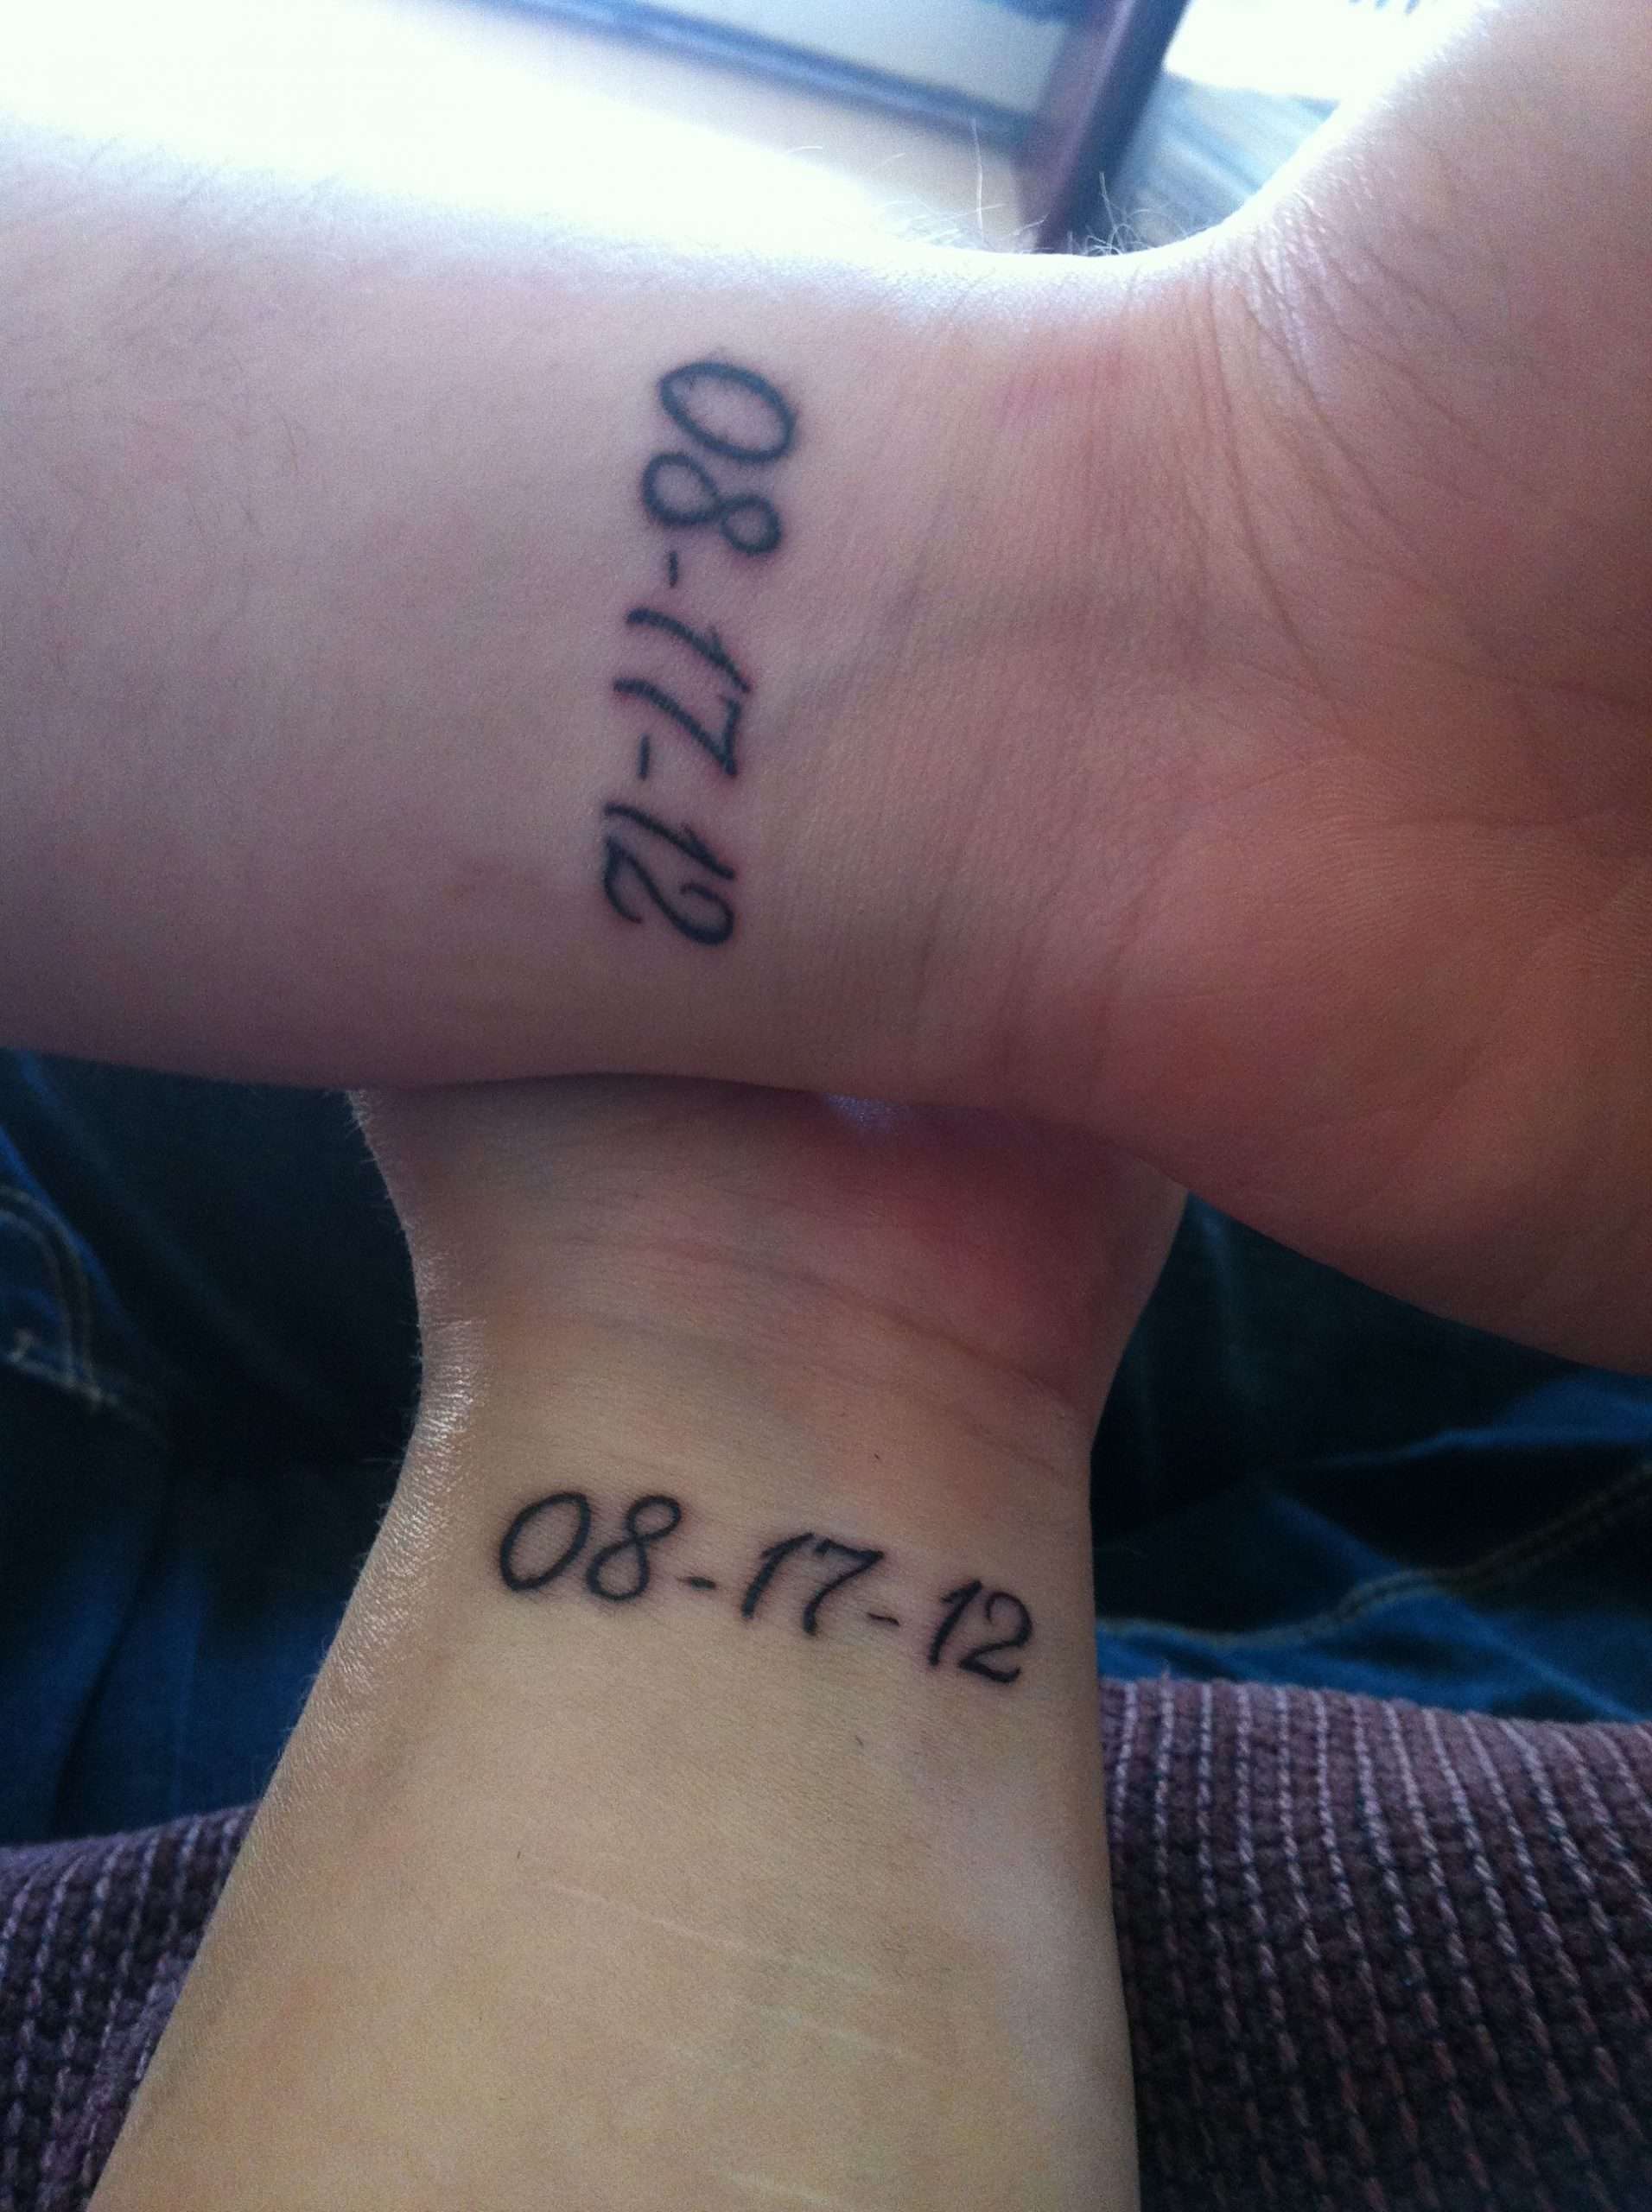 Date of engagement tattoos. Wedding date would be on the ...